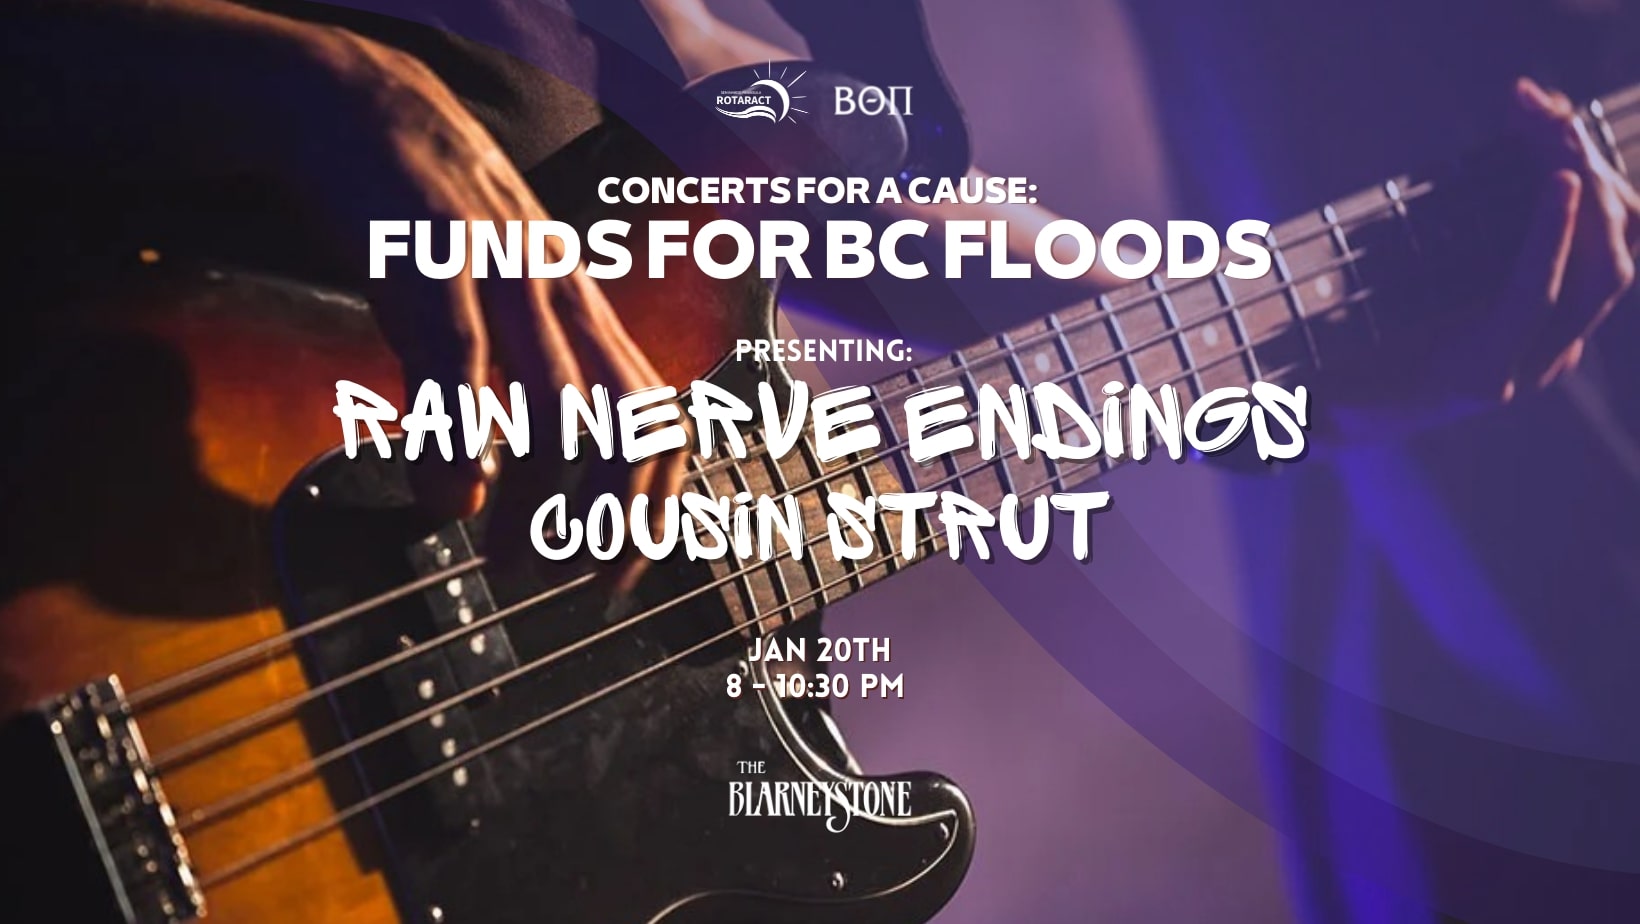 Concerts for a Cause: Funds for BC Floods Vol 2